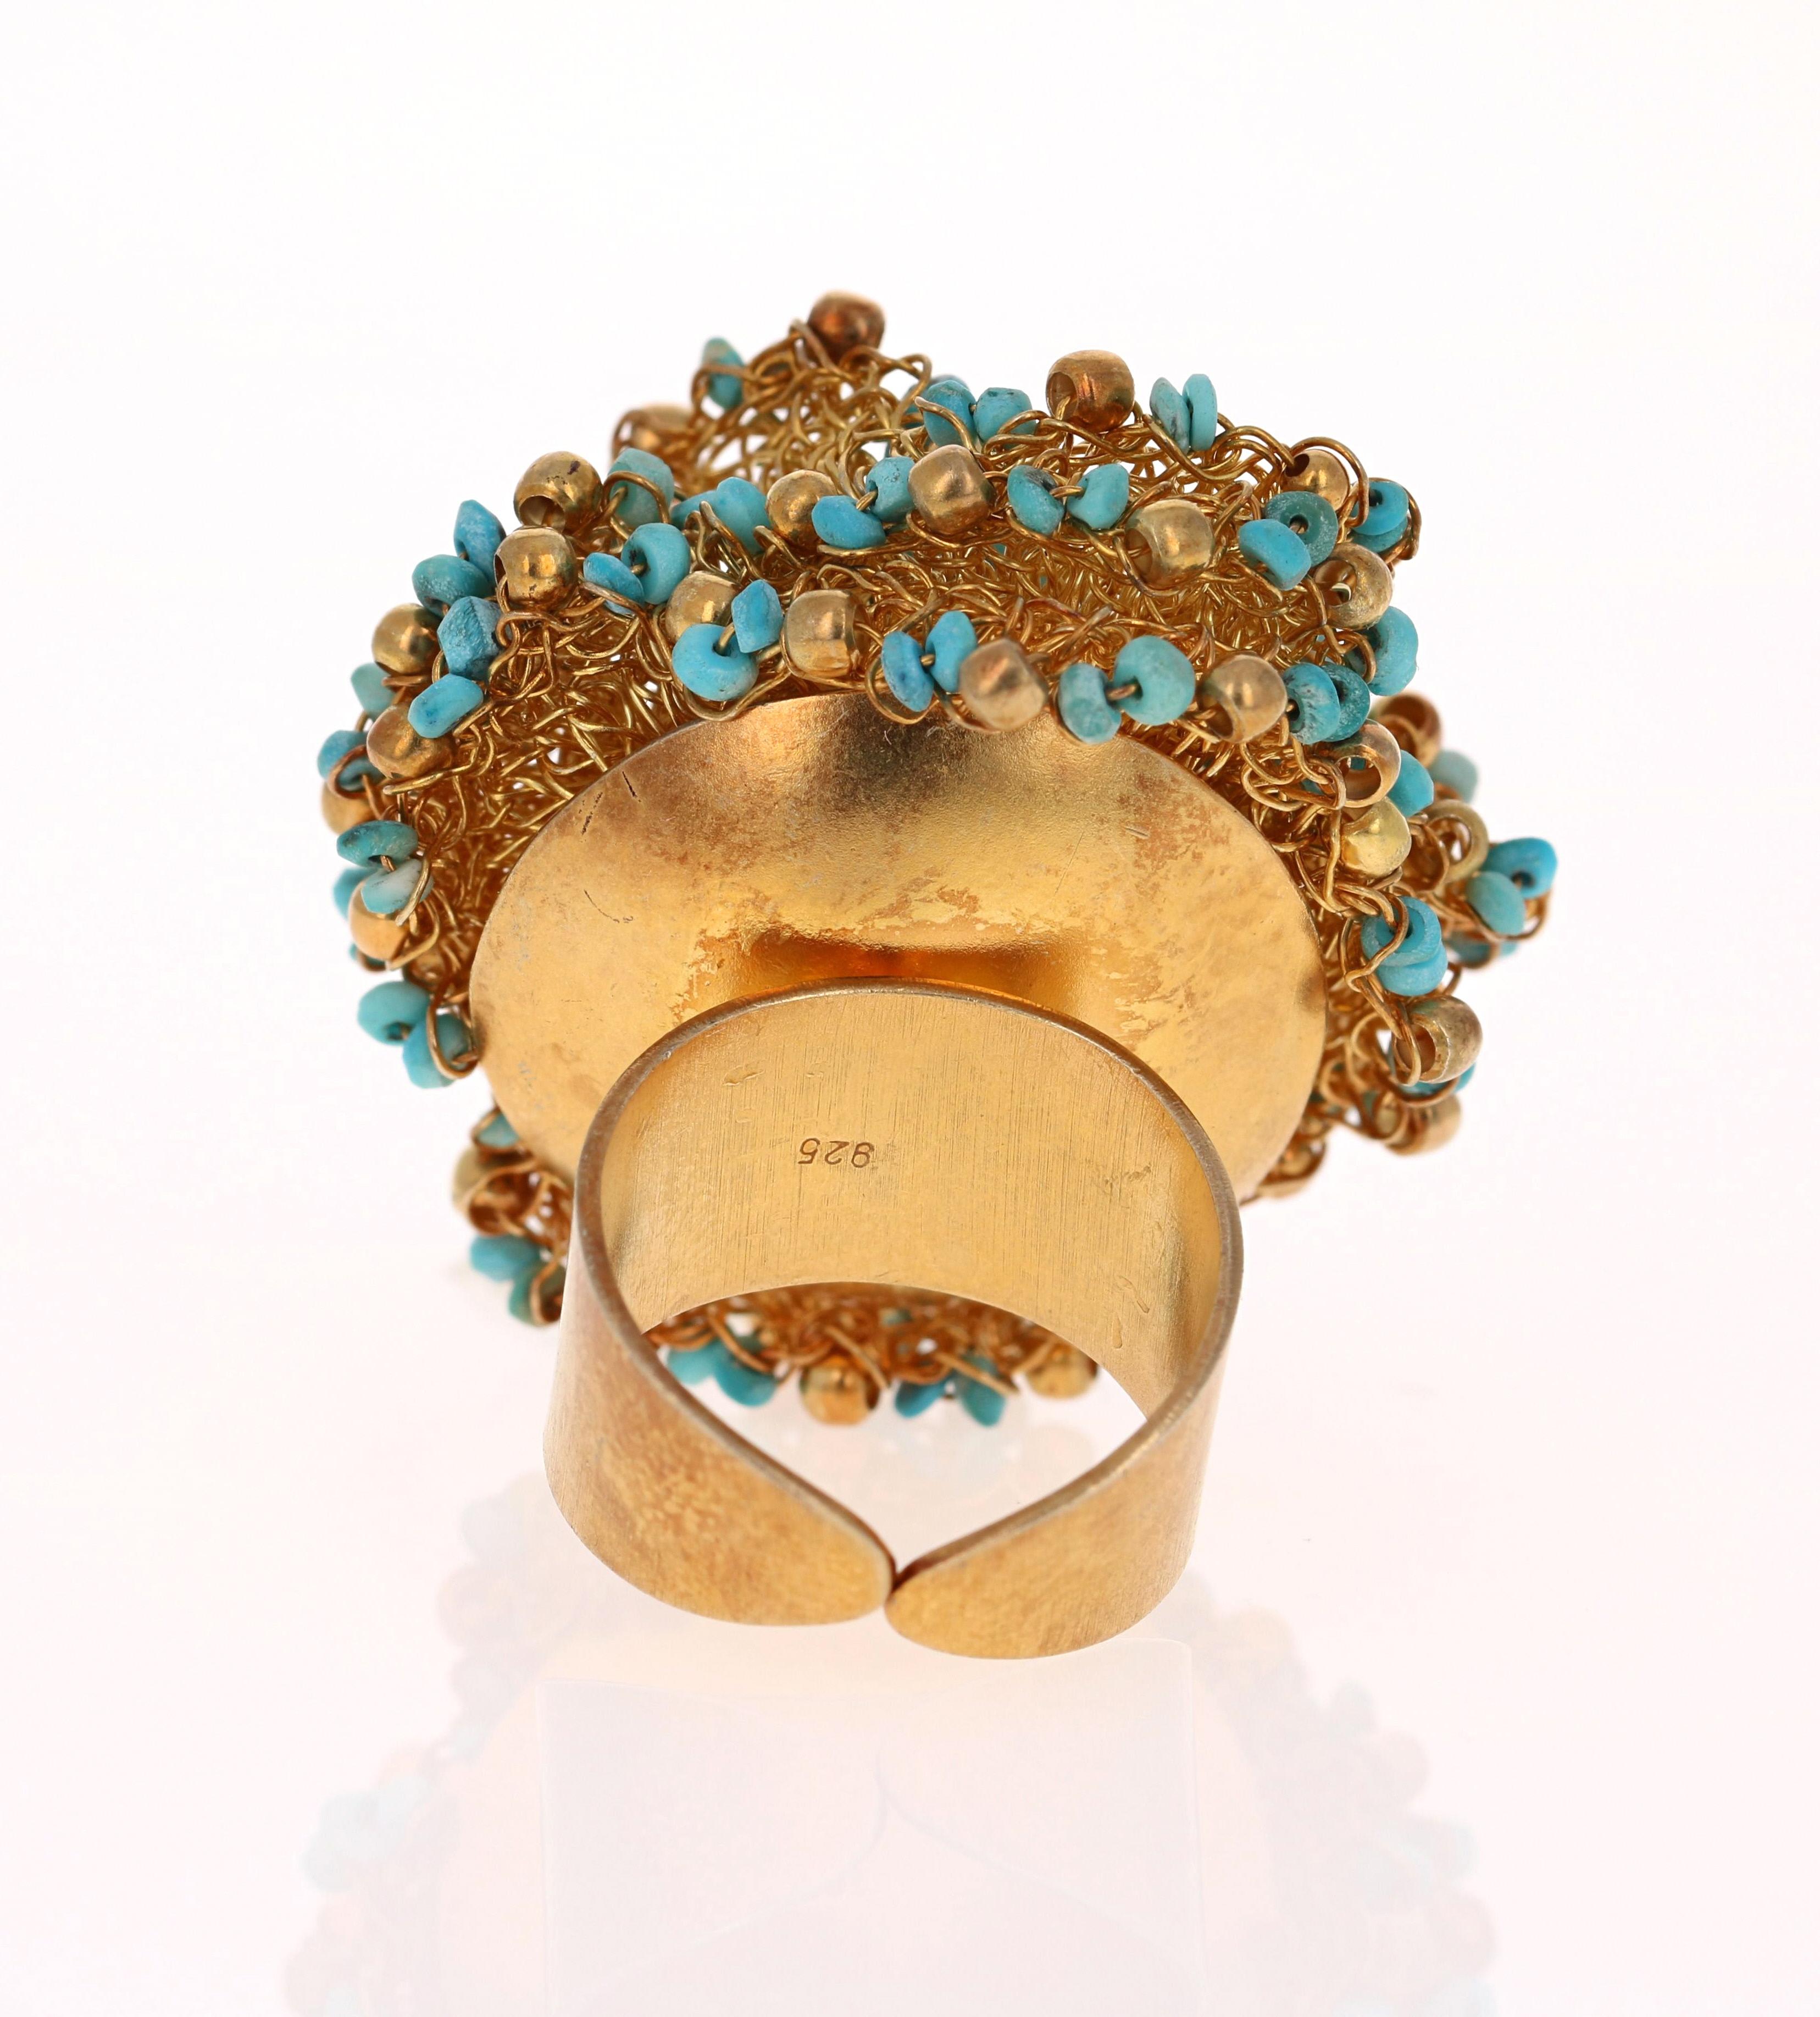 Bead Sterling Silver 22 Karat Gold-Plated Genuine Turquoise Ring